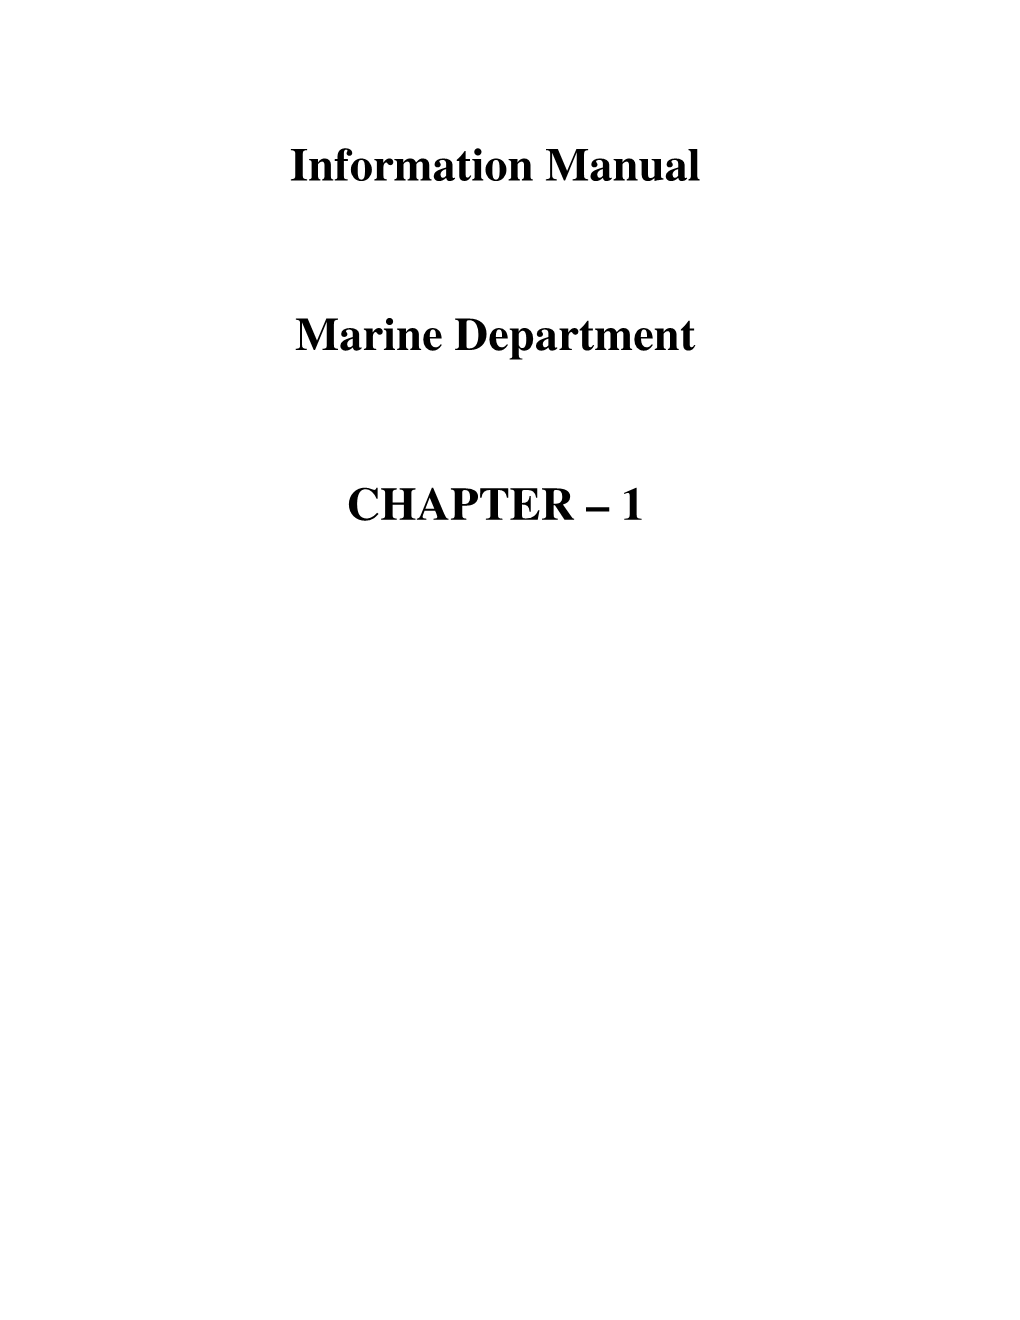 Information Manual Marine Department CHAPTER